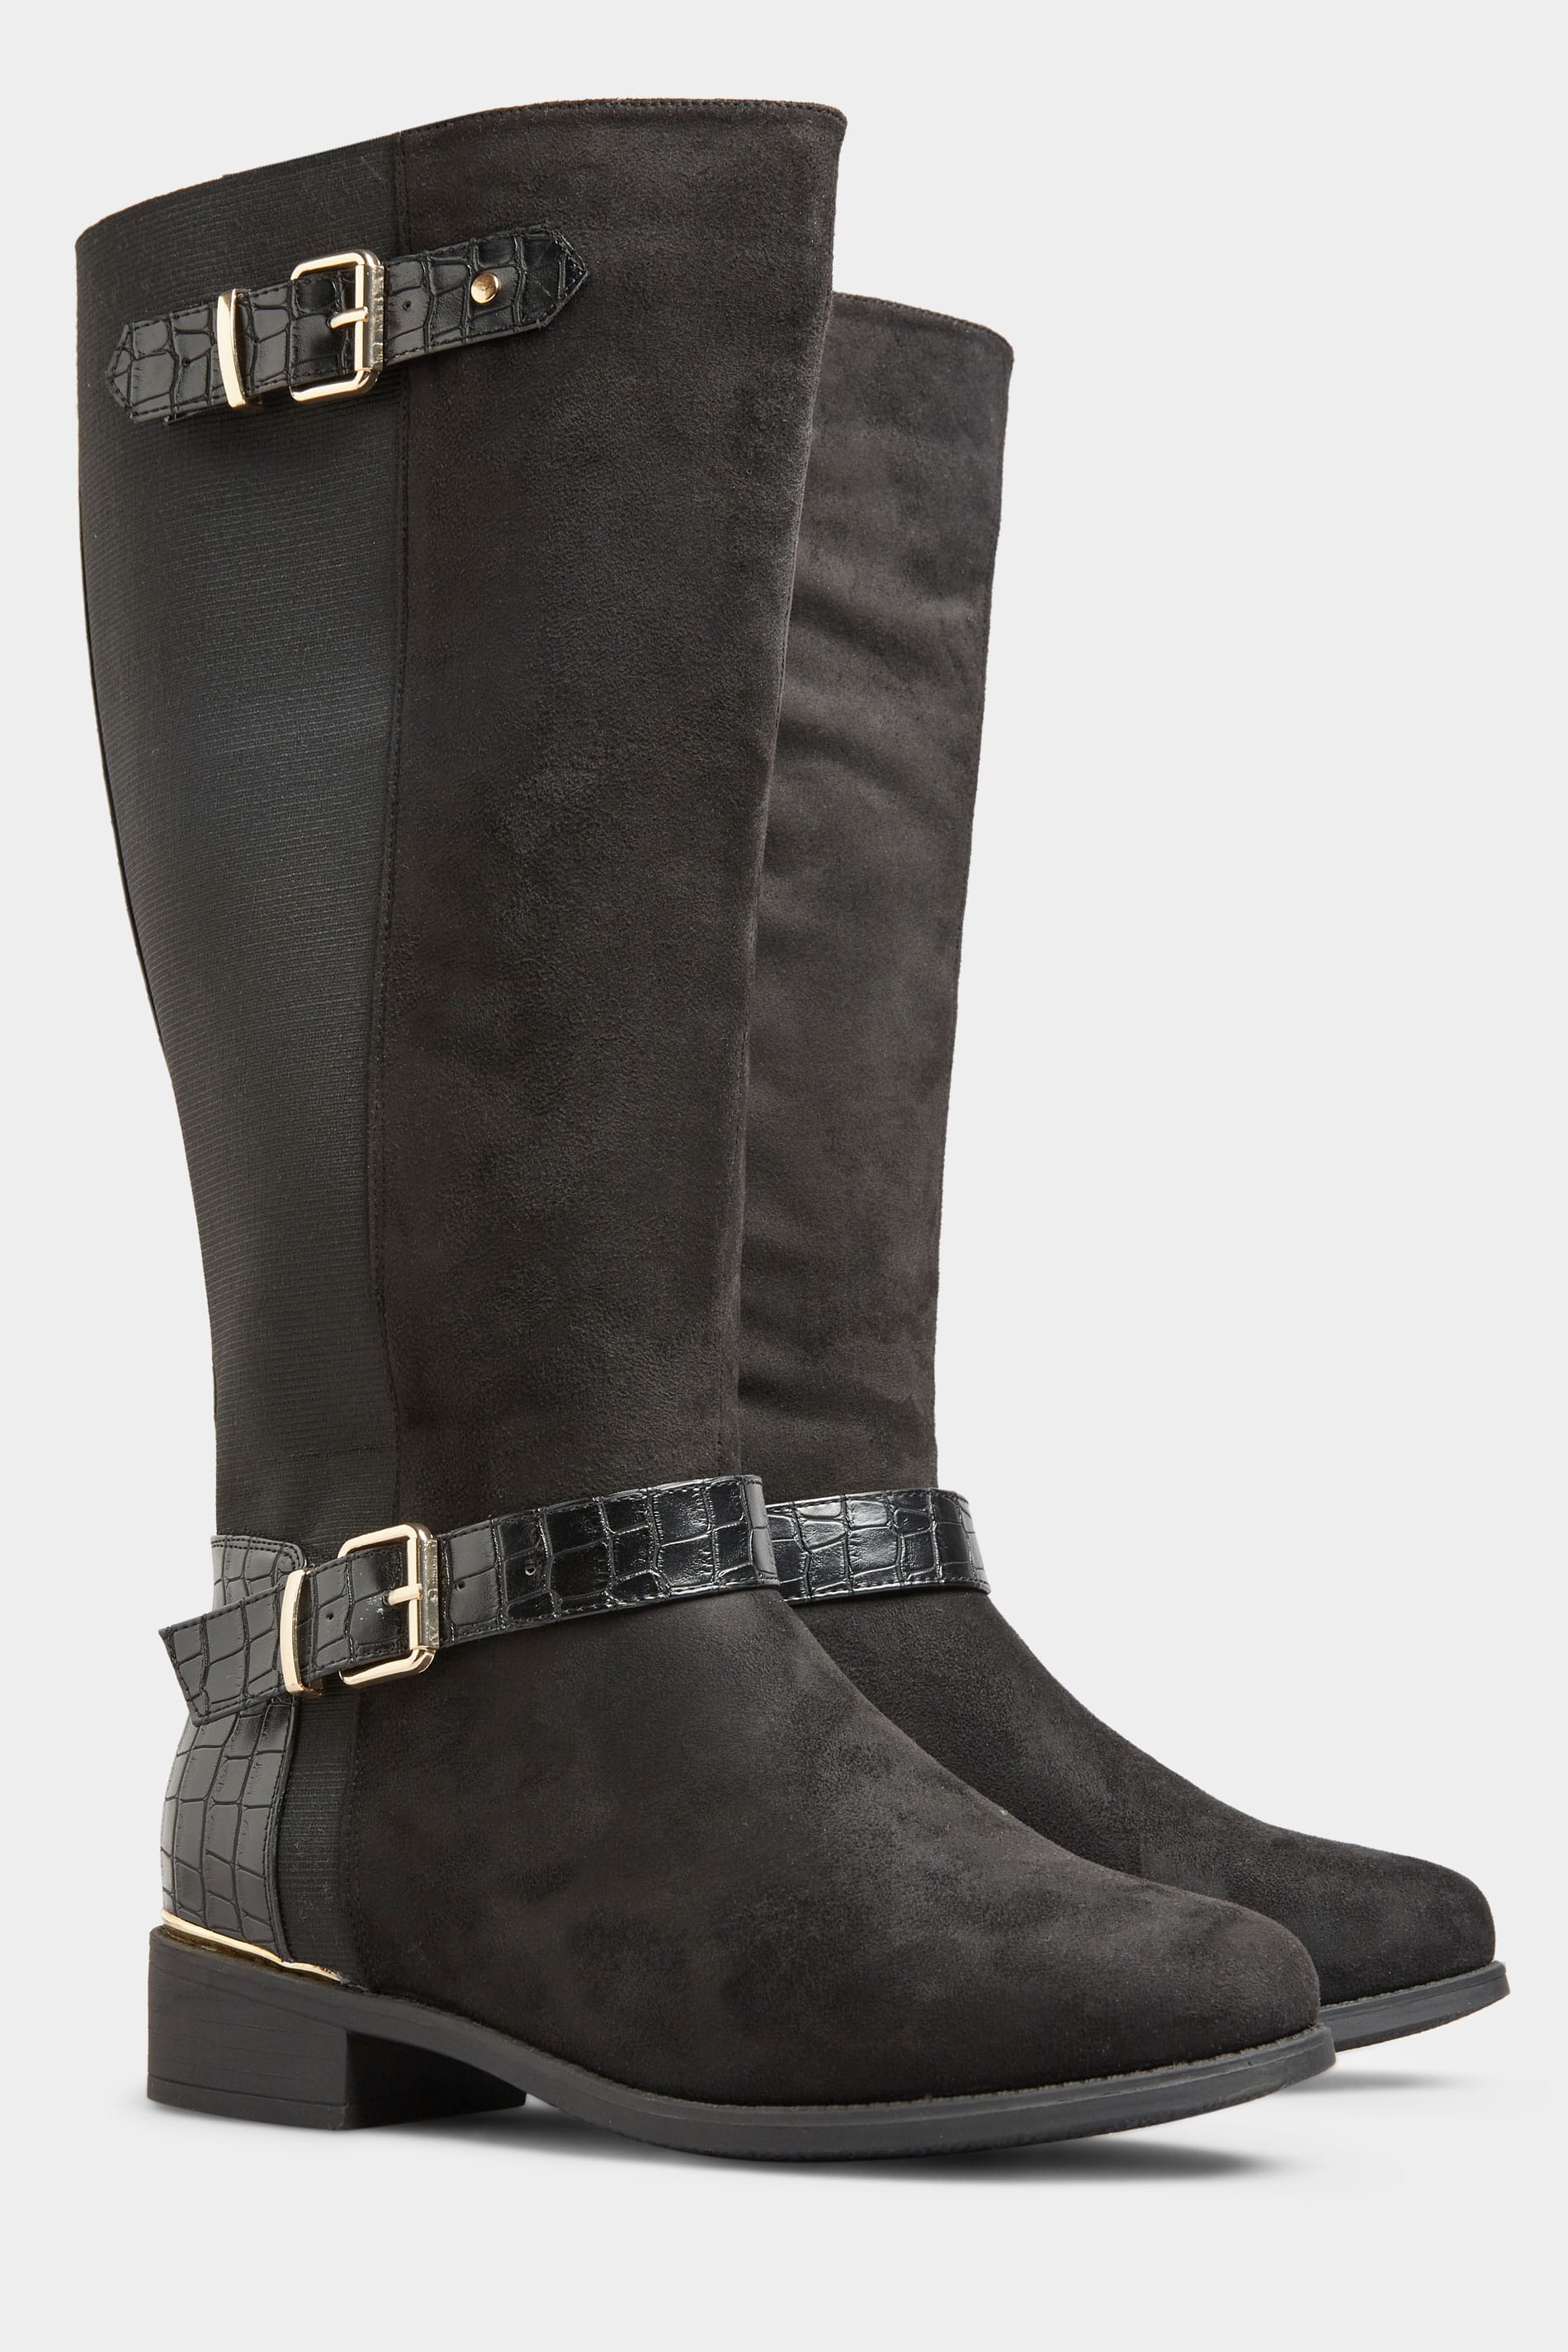 Black Faux Suede Croc Stretch Knee High Boots In Extra Wide Fit_449d.jpg